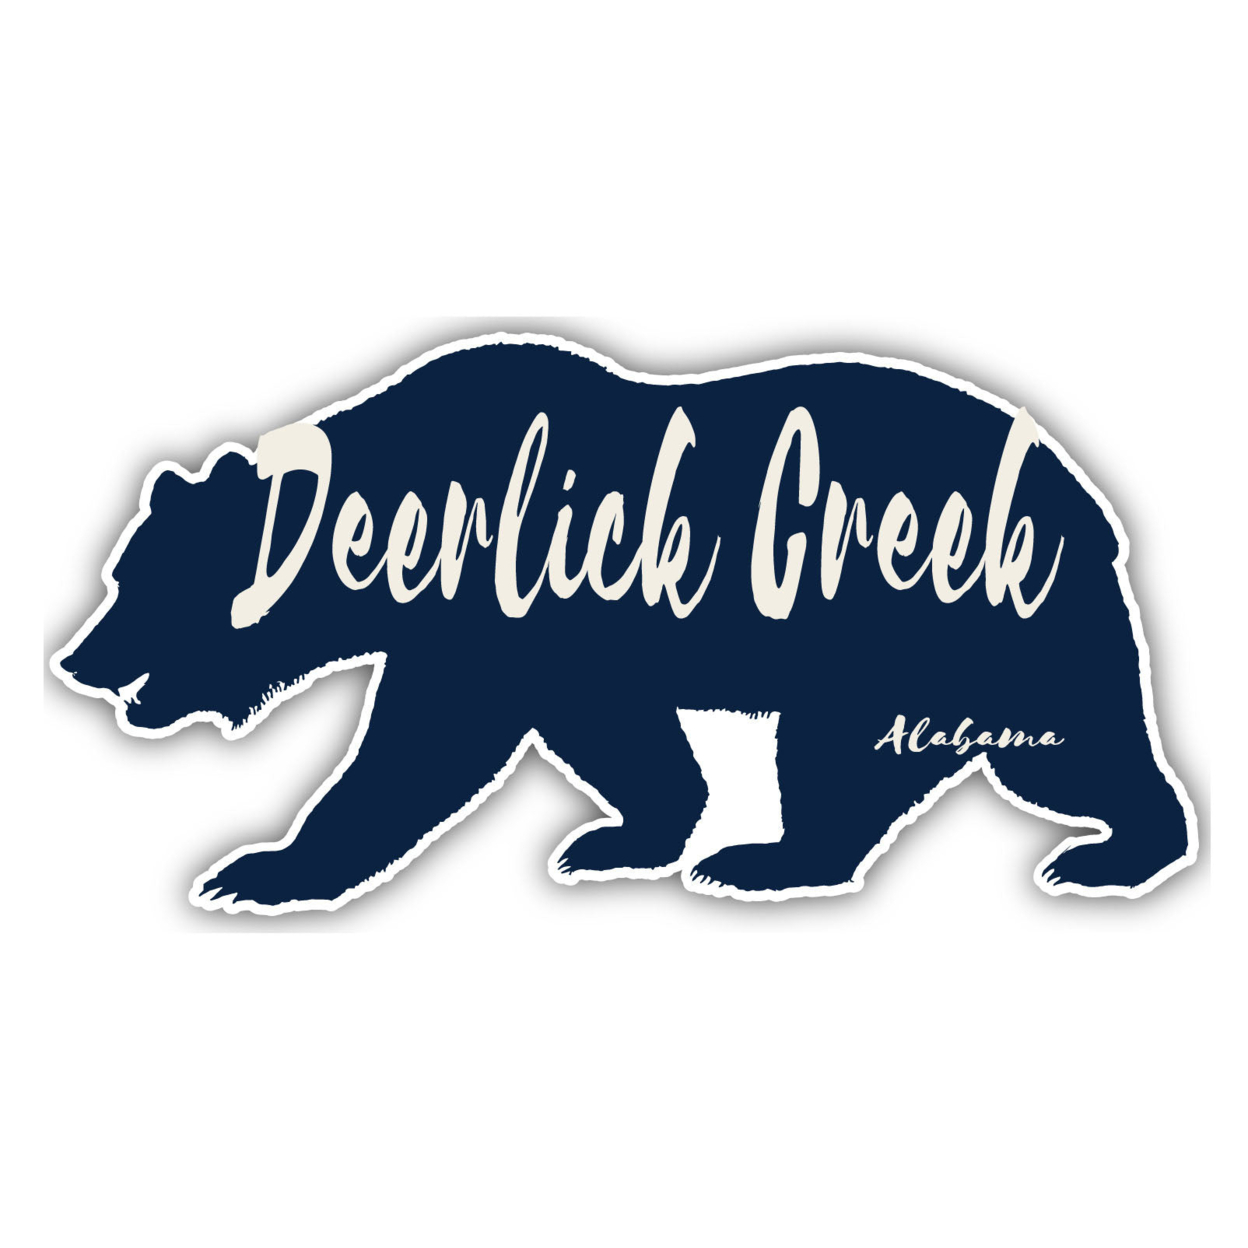 Deerlick Creek Alabama Souvenir Decorative Stickers (Choose Theme And Size) - 4-Pack, 10-Inch, Tent